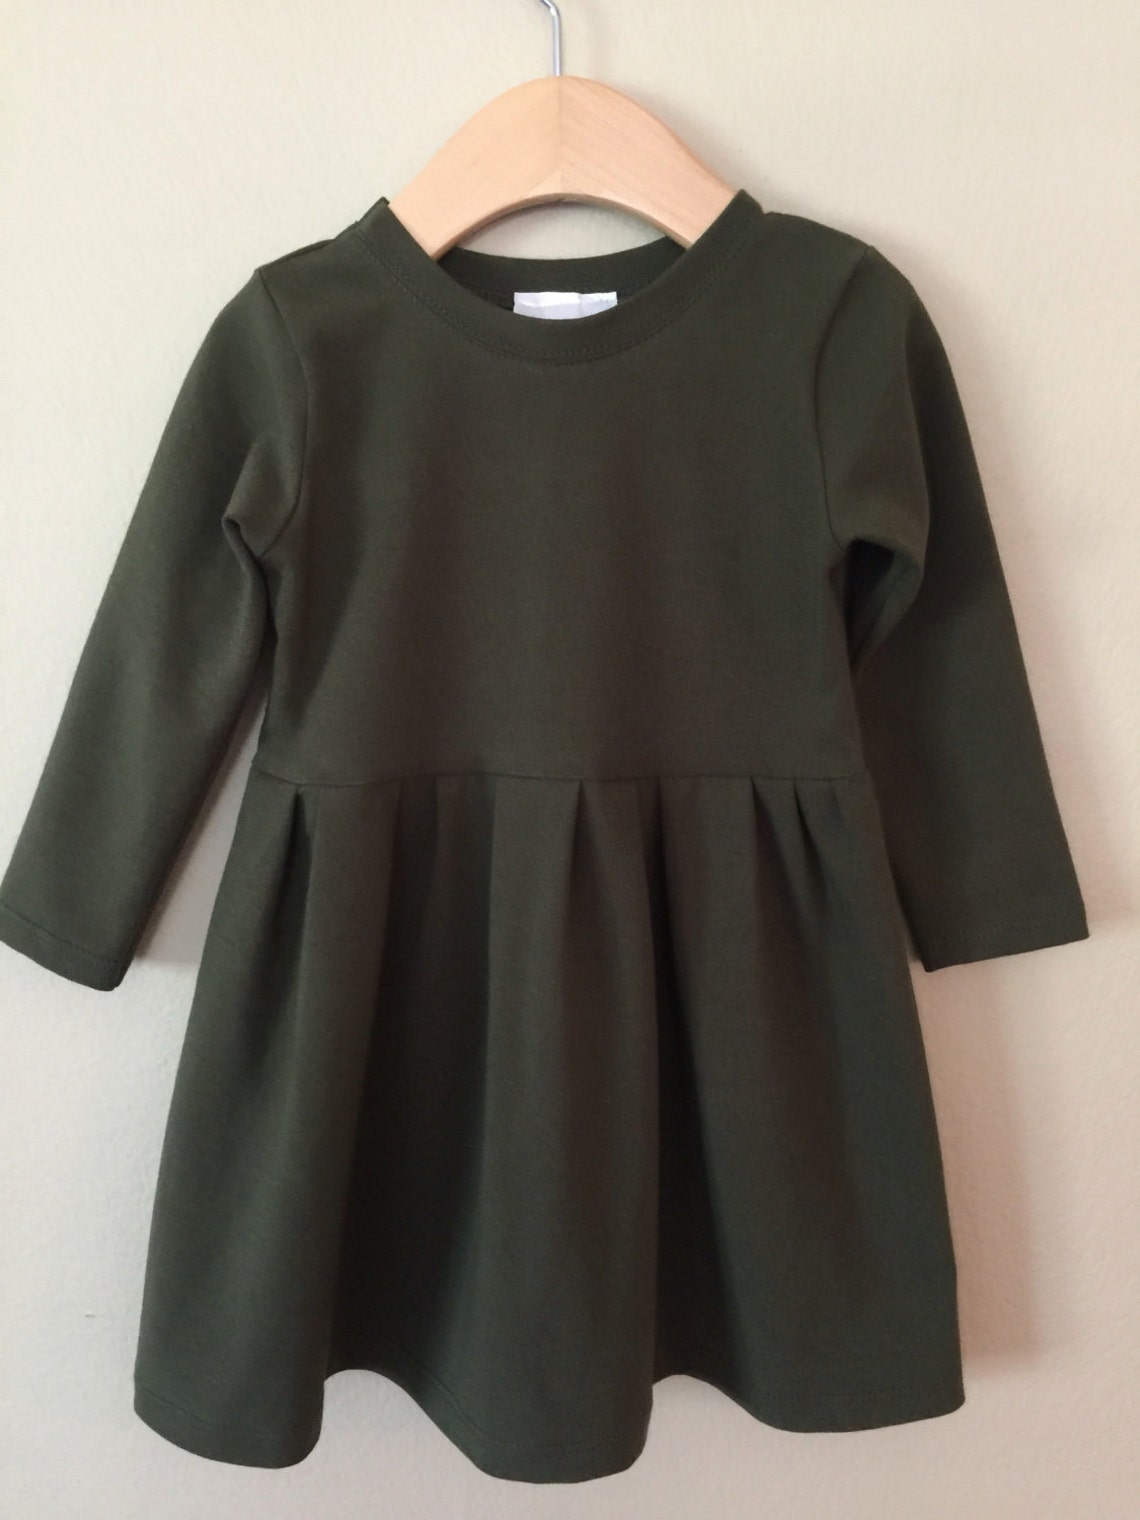 Baby Toddler Girl Dress Long Sleeve Made to Order olive - Etsy